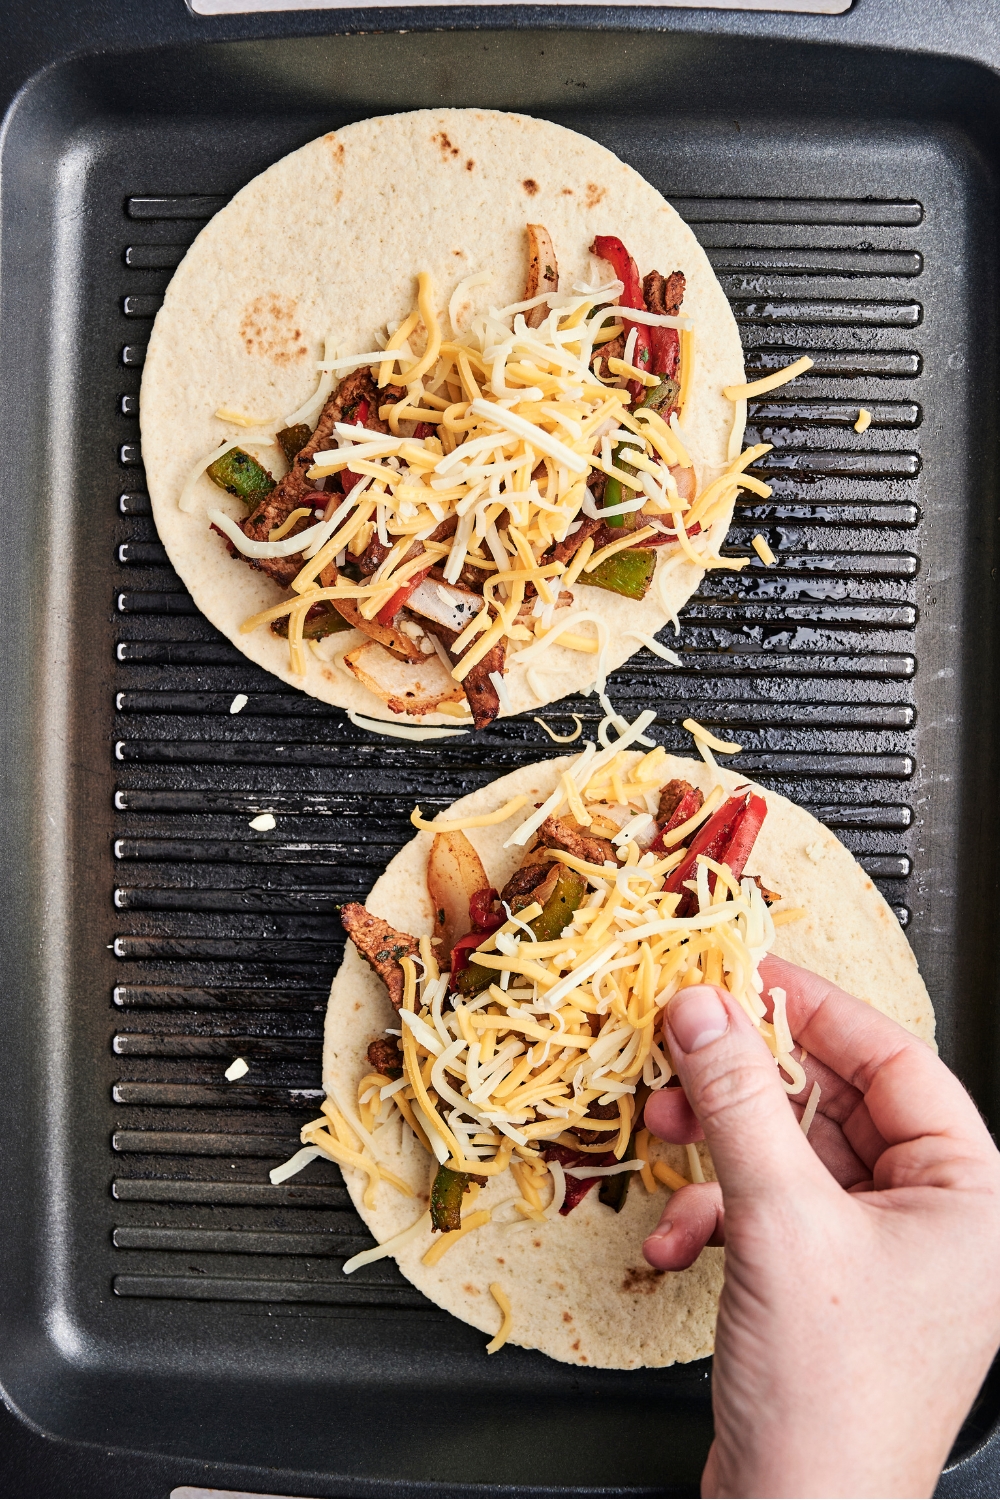 Someone sprinkles shredded cheddar cheese over two open tortillas on a grill pan. The tortillas are also holding steak and vegetables.